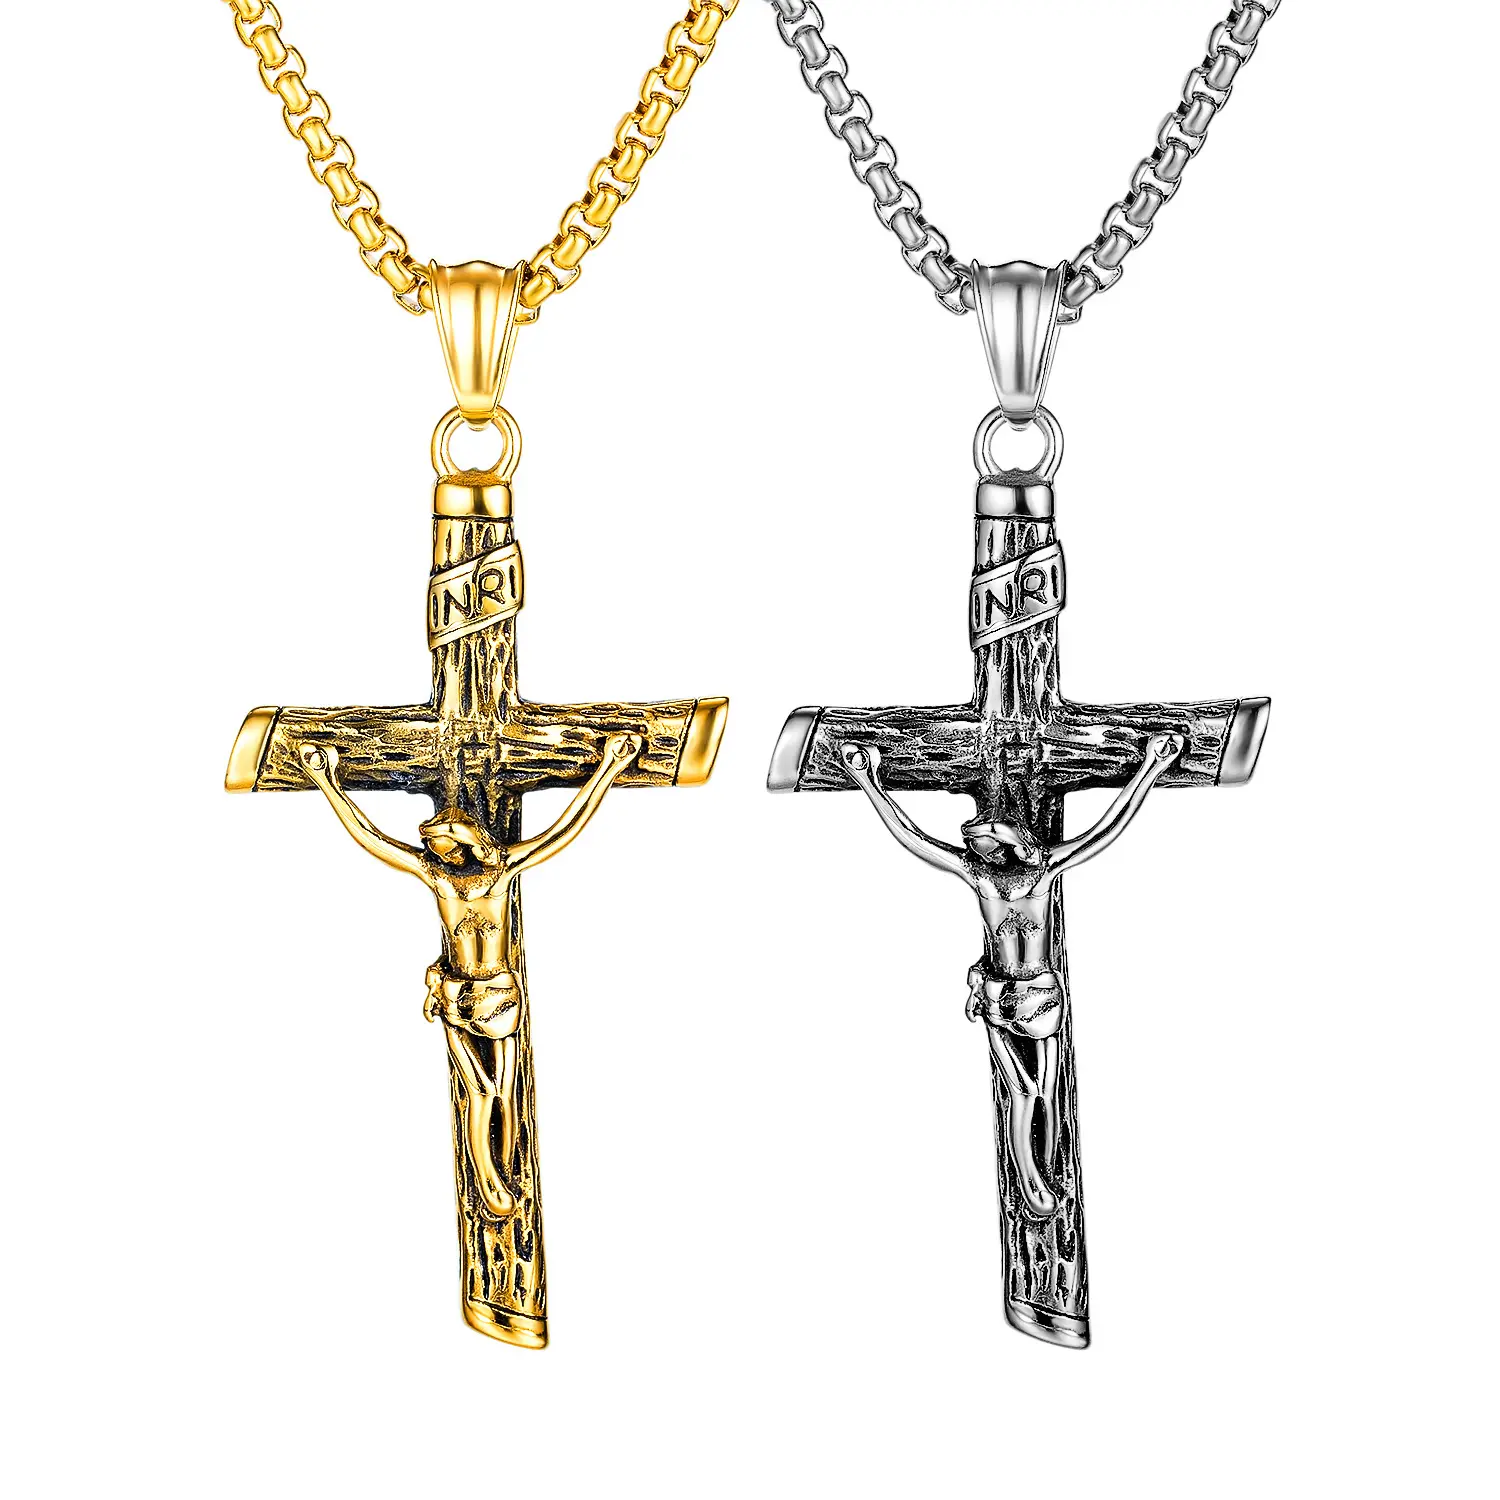 New Religious Cross Necklace Stainless Steel Cross Pendant Necklace Keel Chain Necklace For Men